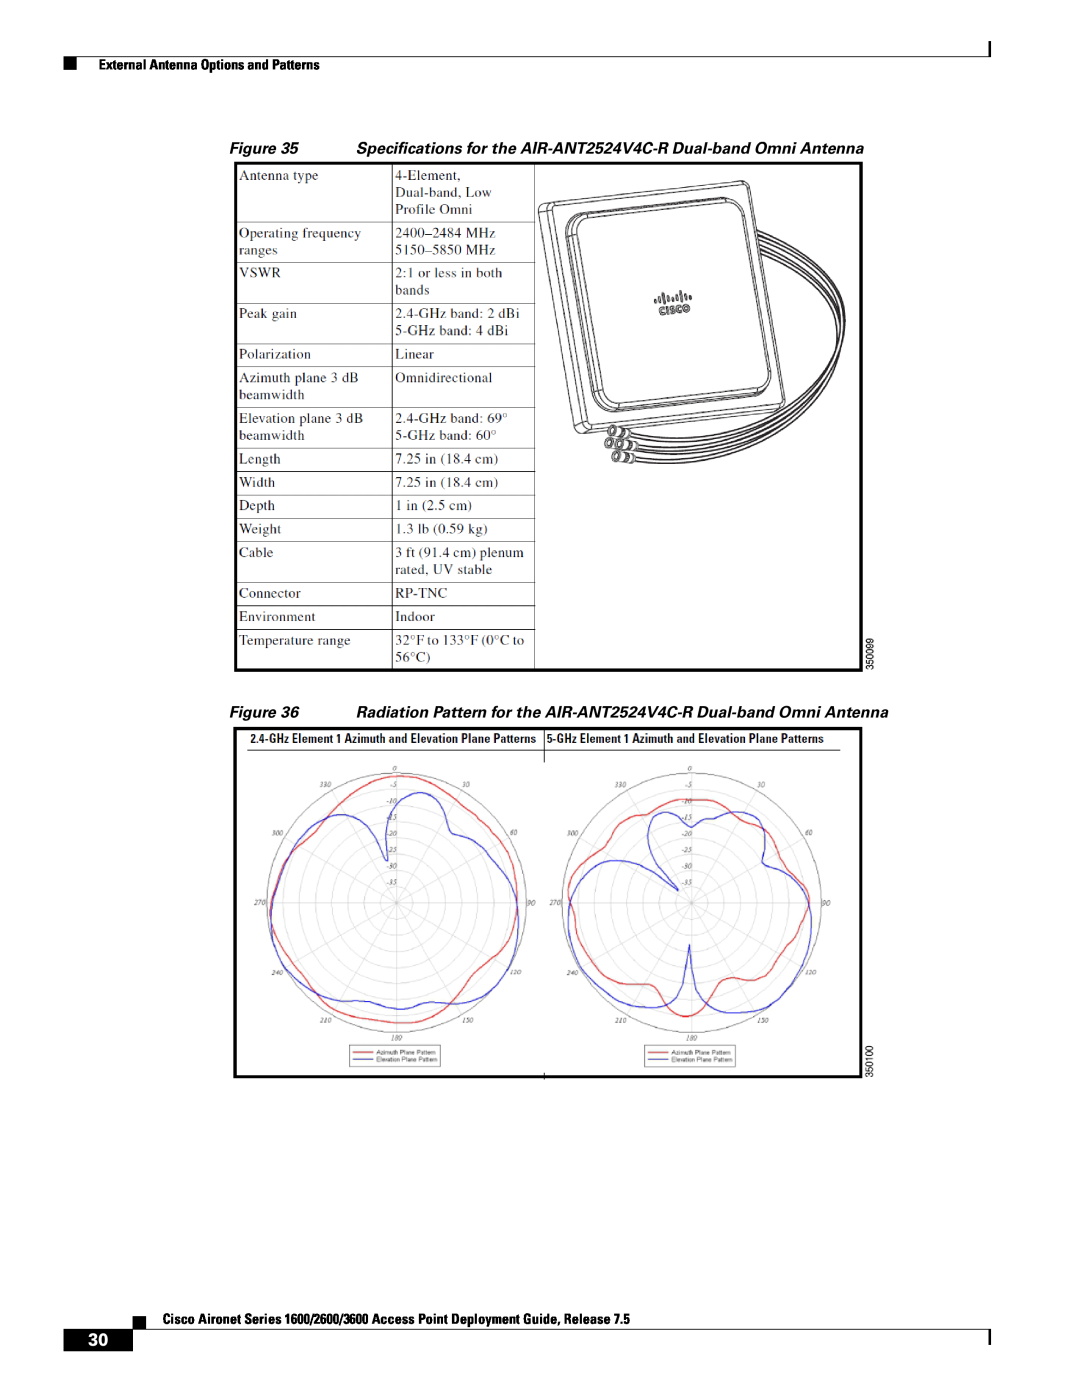 Cisco Systems AIRRM3000ACAK9 manual Specifications for the AIR-ANT2524V4C-R Dual-band Omni Antenna 